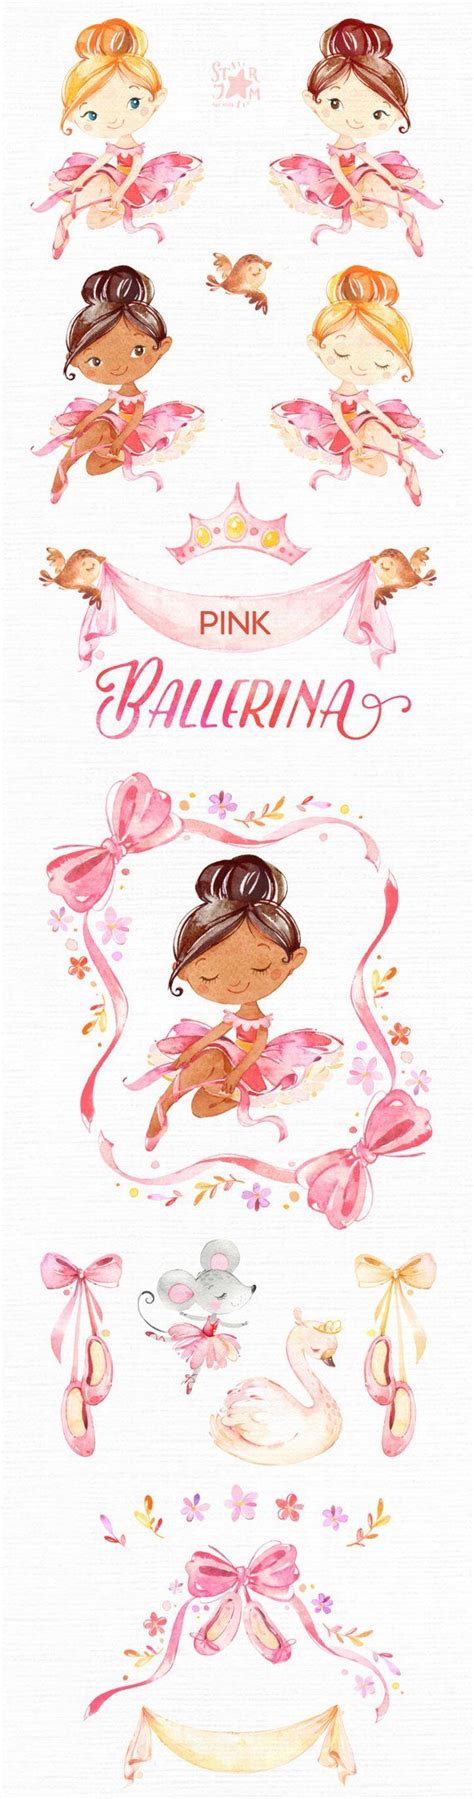 Pin By Larisa Buligyna On Детки картинки Watercolor Clipart